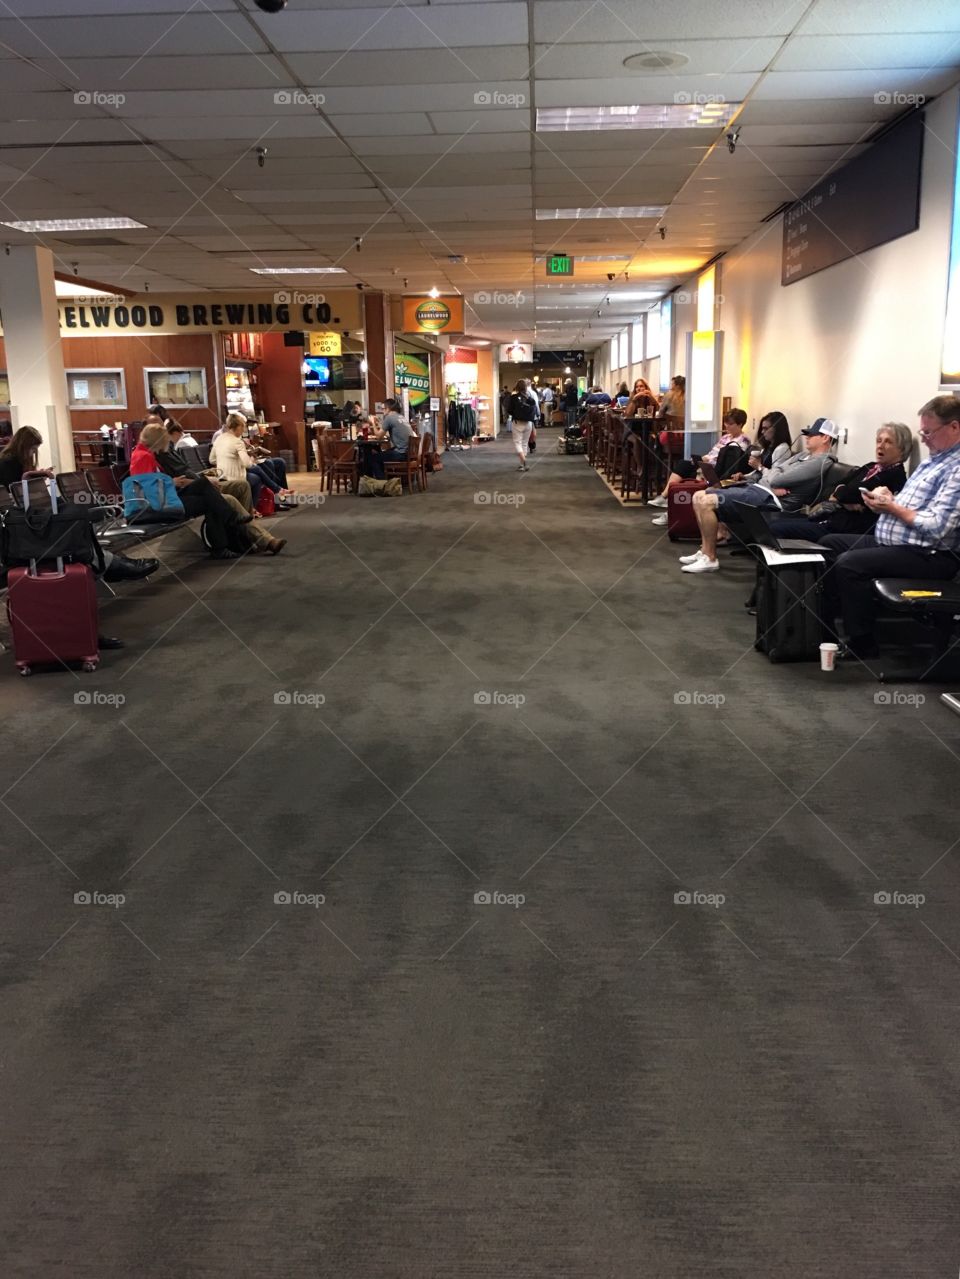 Portland airport waiting area lined with strangers against the gray carpet